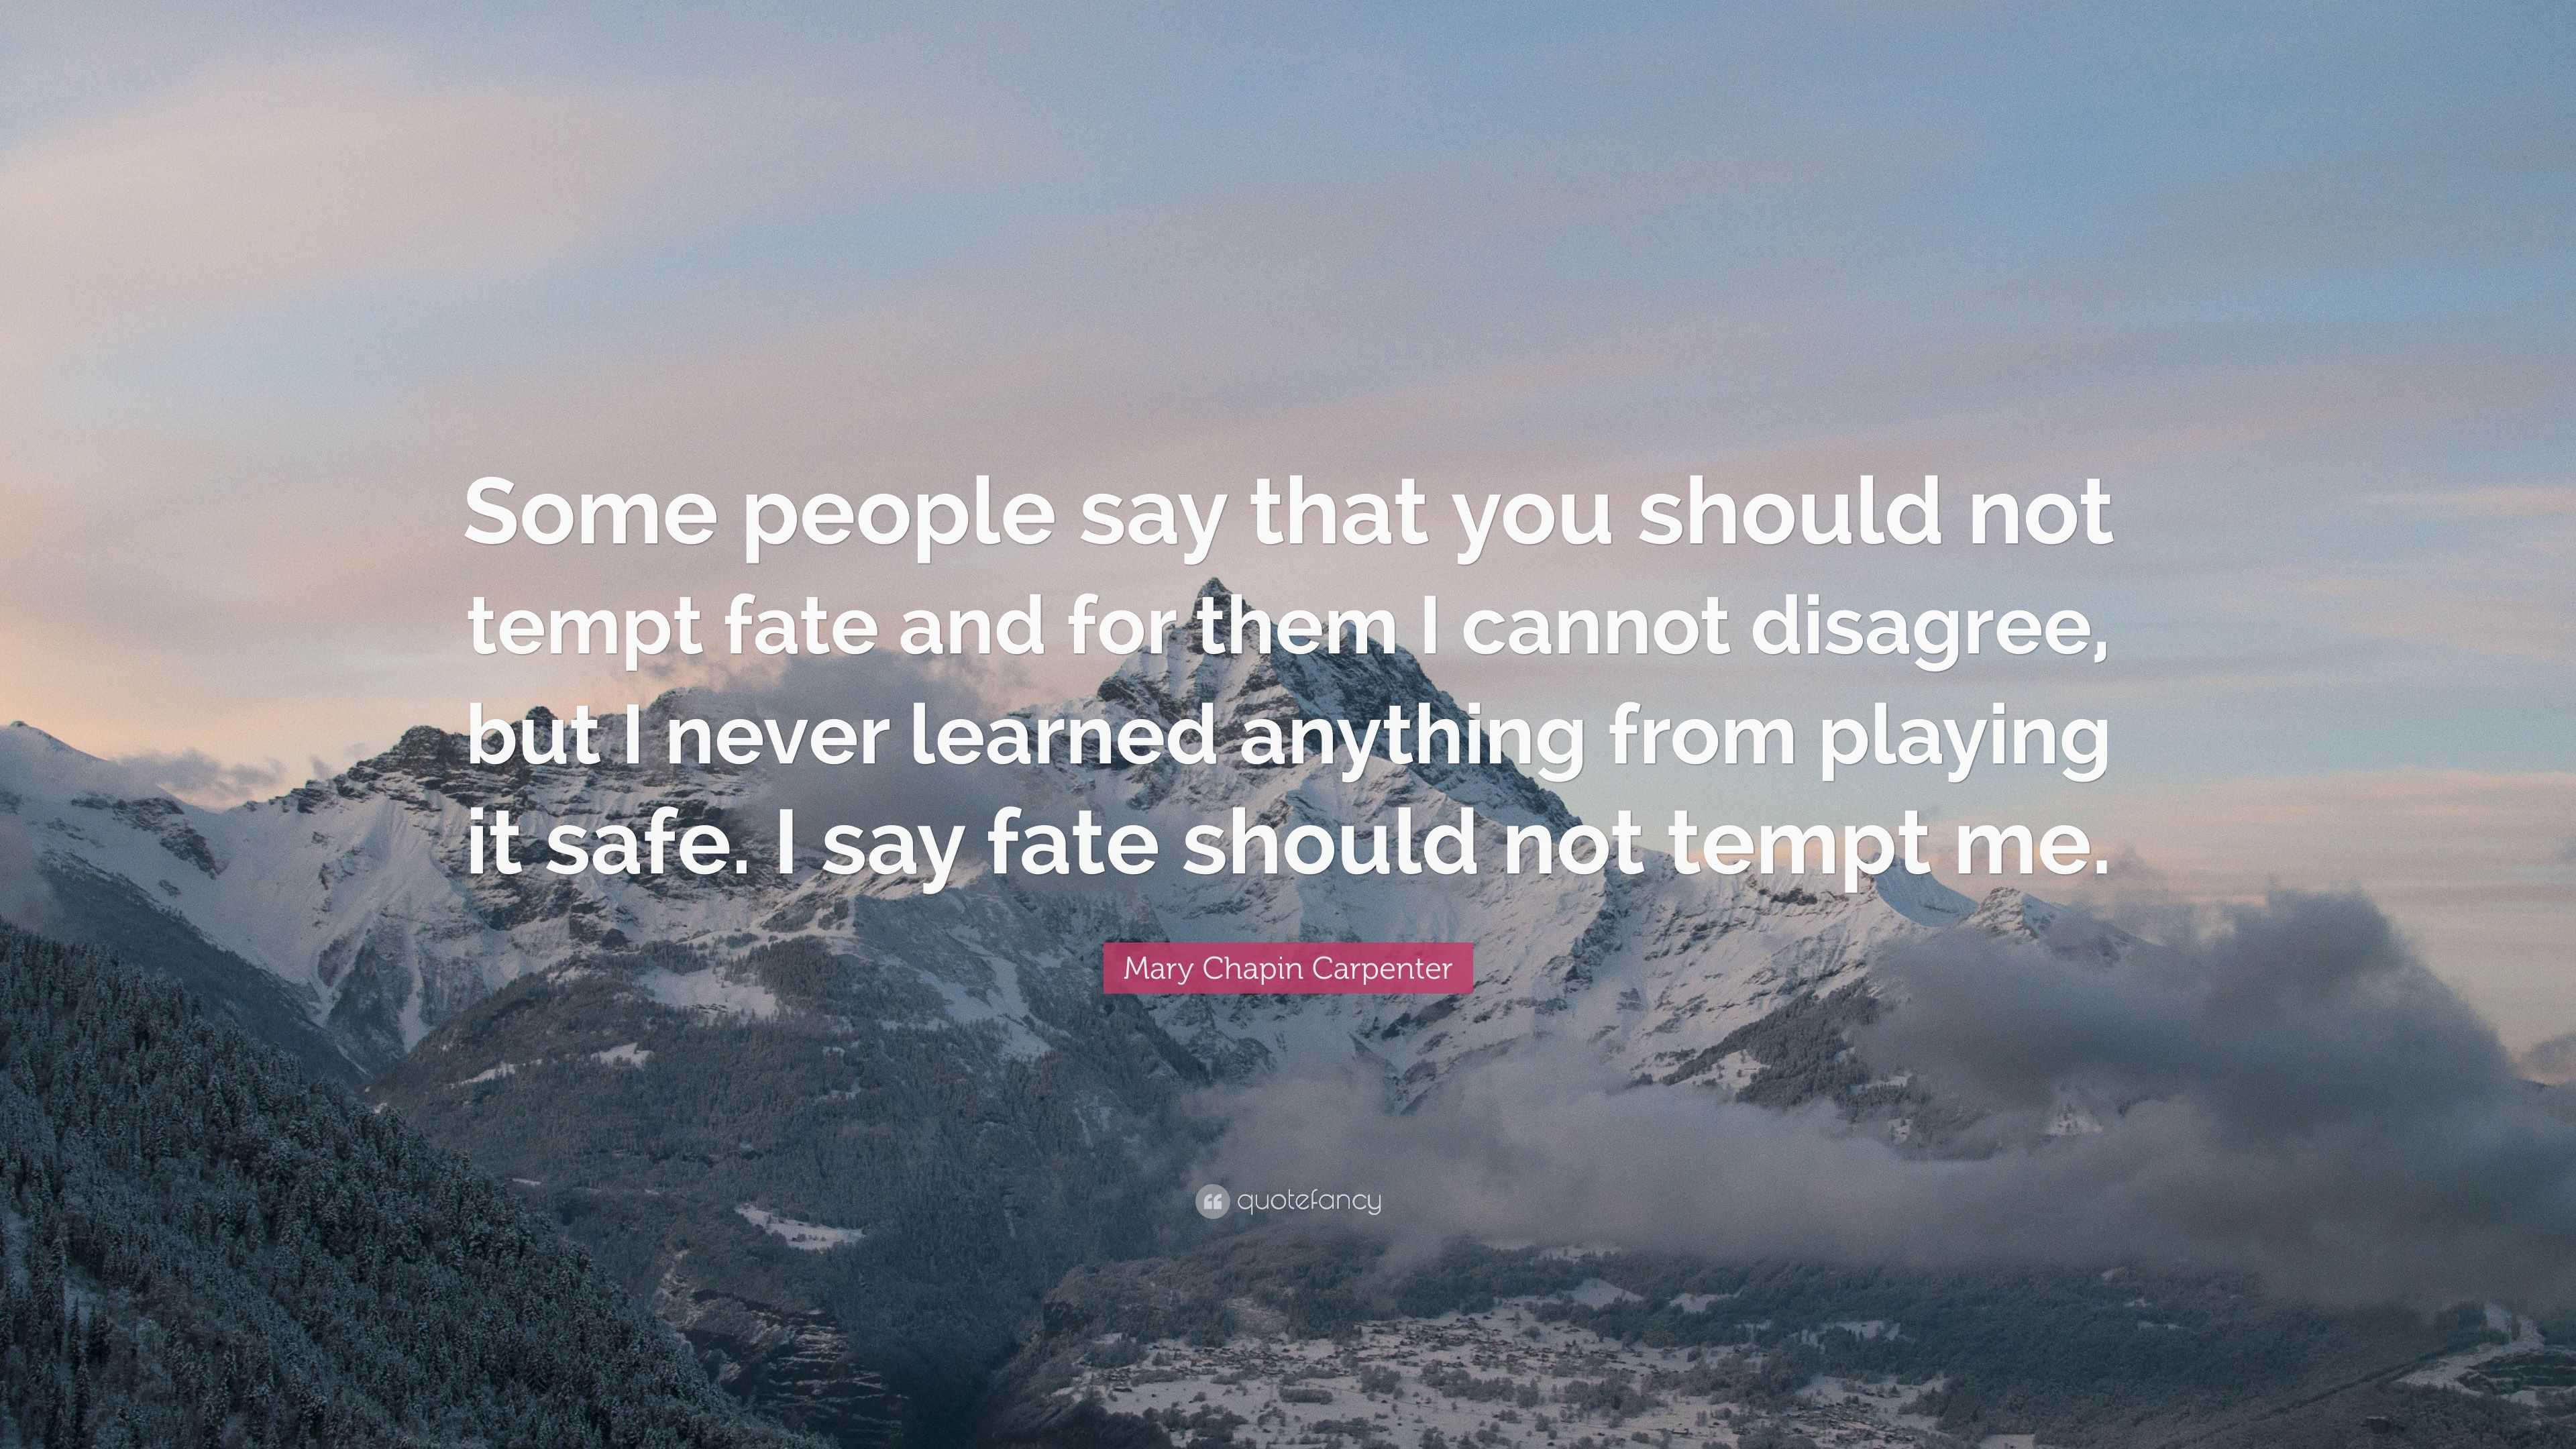 Mary Chapin Carpenter Quote: “Some people say that you should not tempt ...